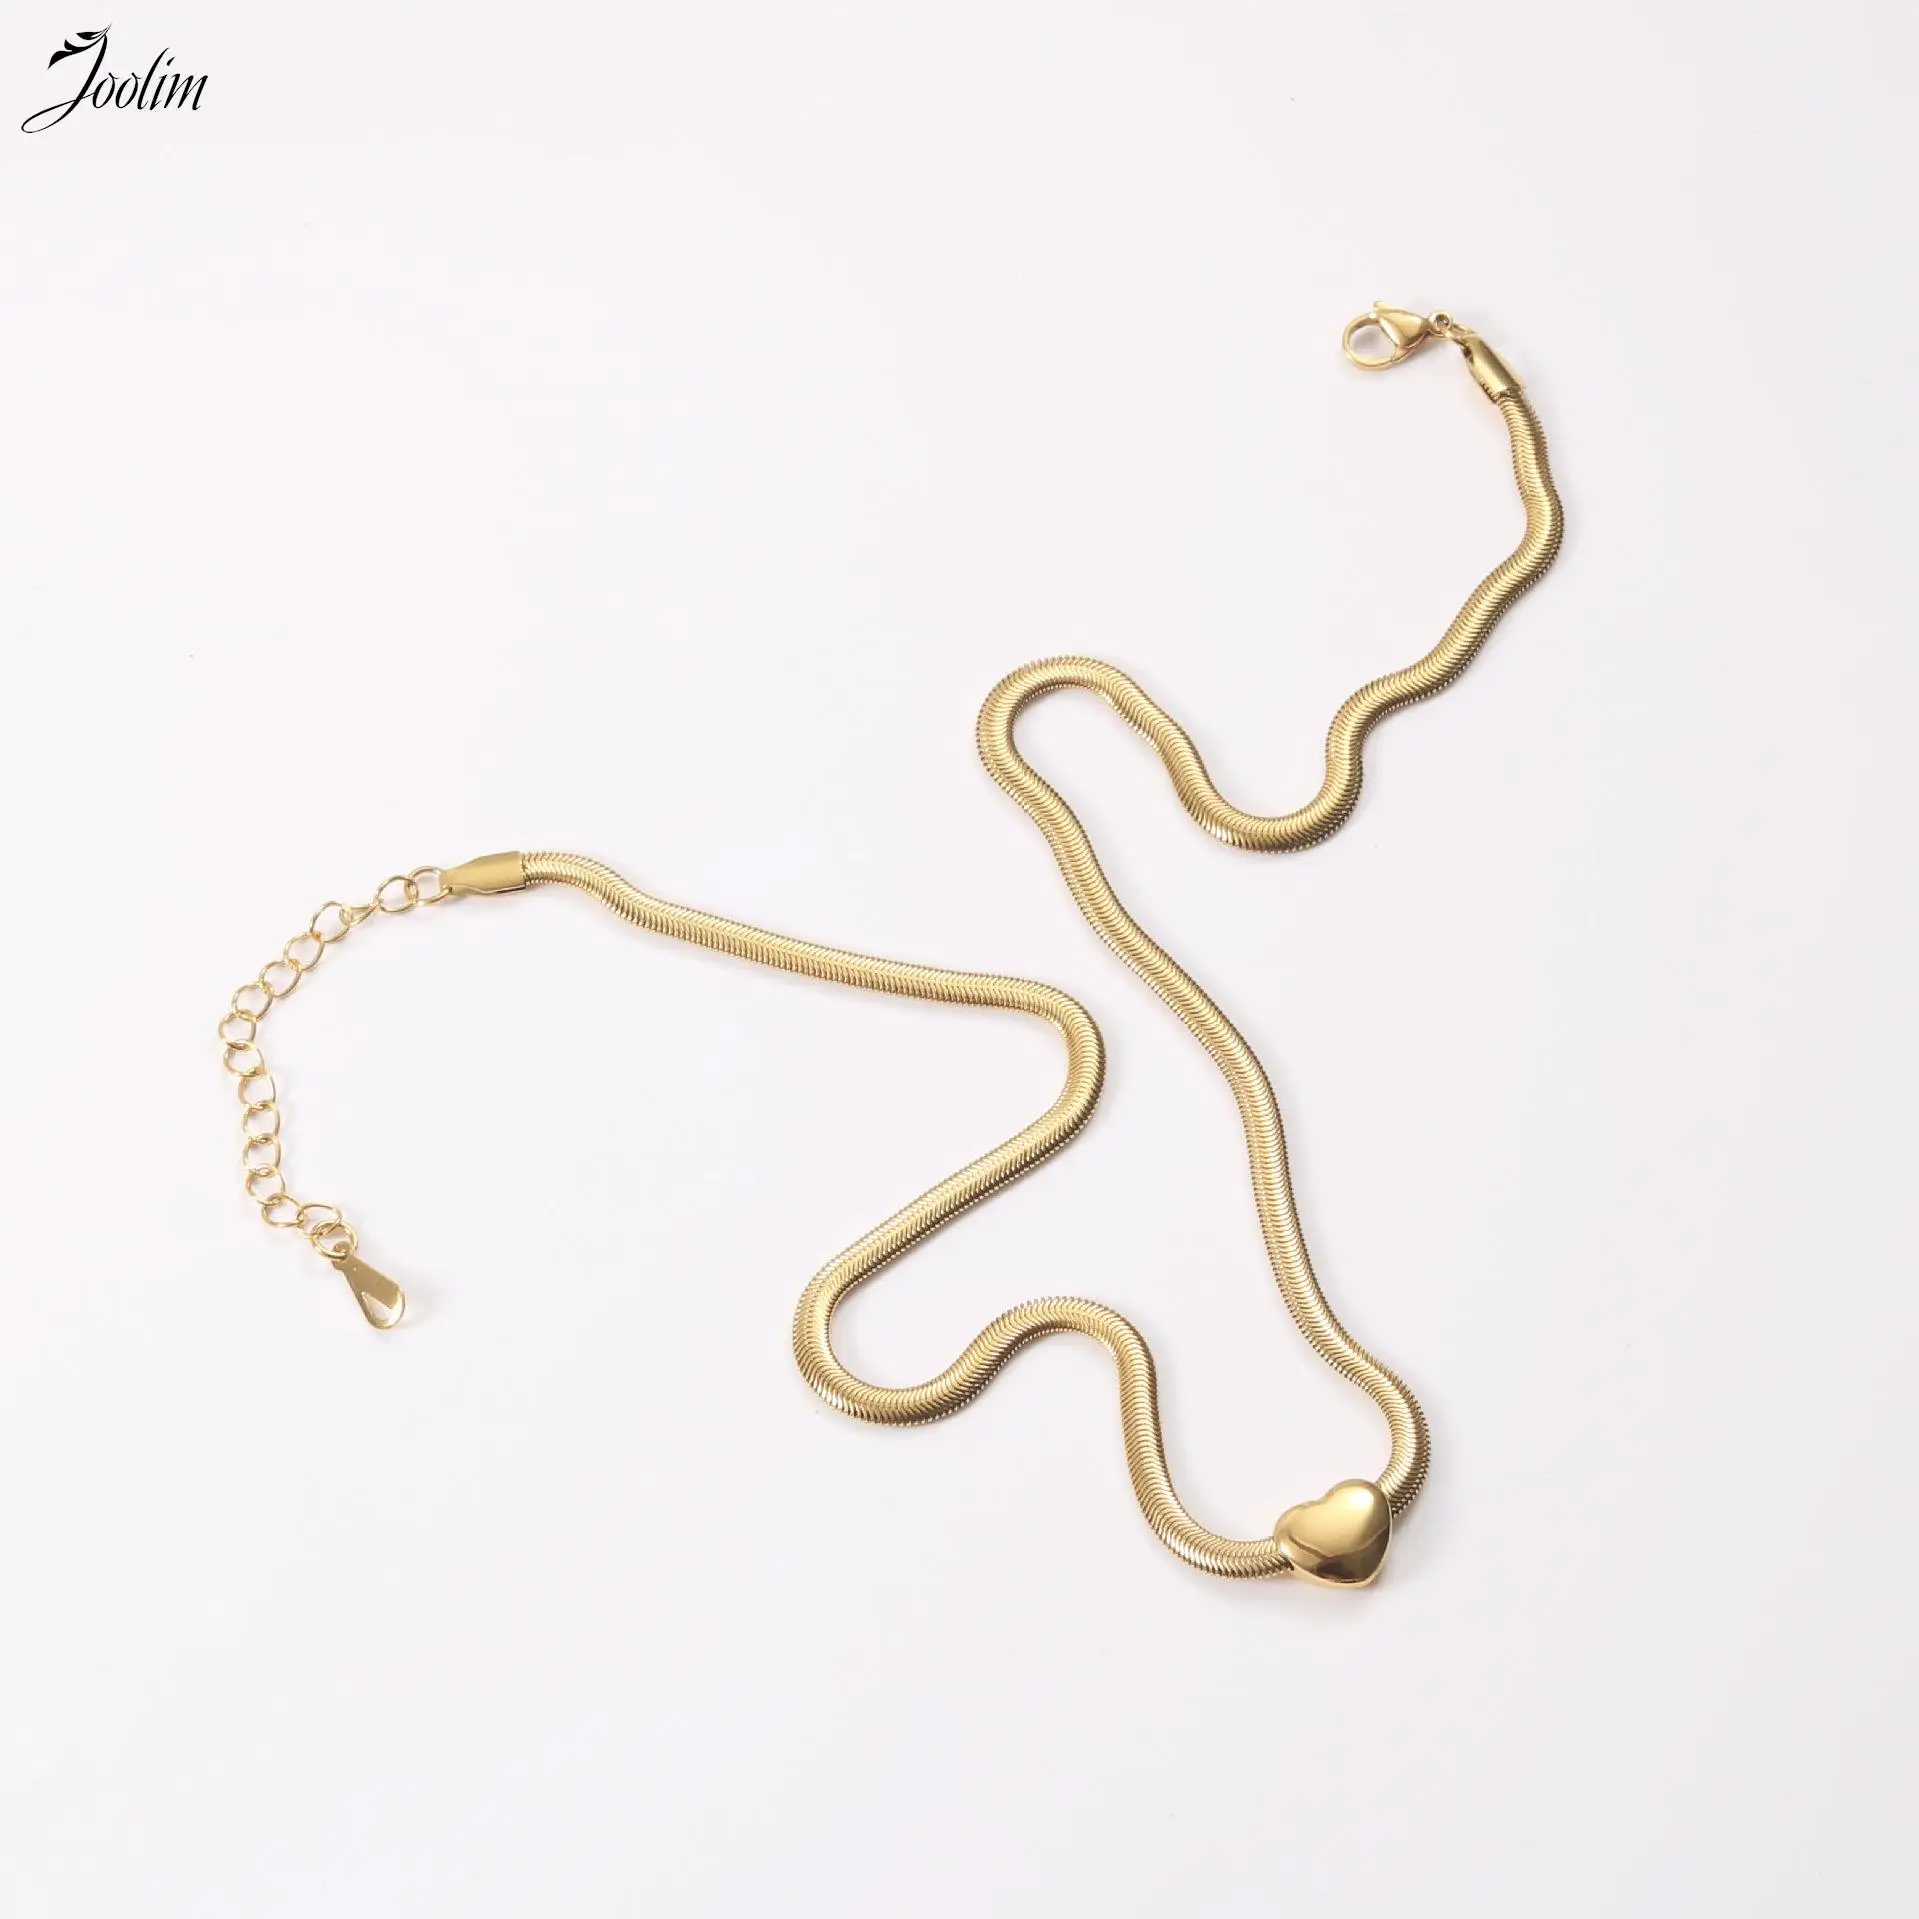 Joolim Jewelry Wholesale Non Tarnish Fashion Soft Snake Chain Hearts Can Move Pendant Necklace Stainless Steel Jewelry